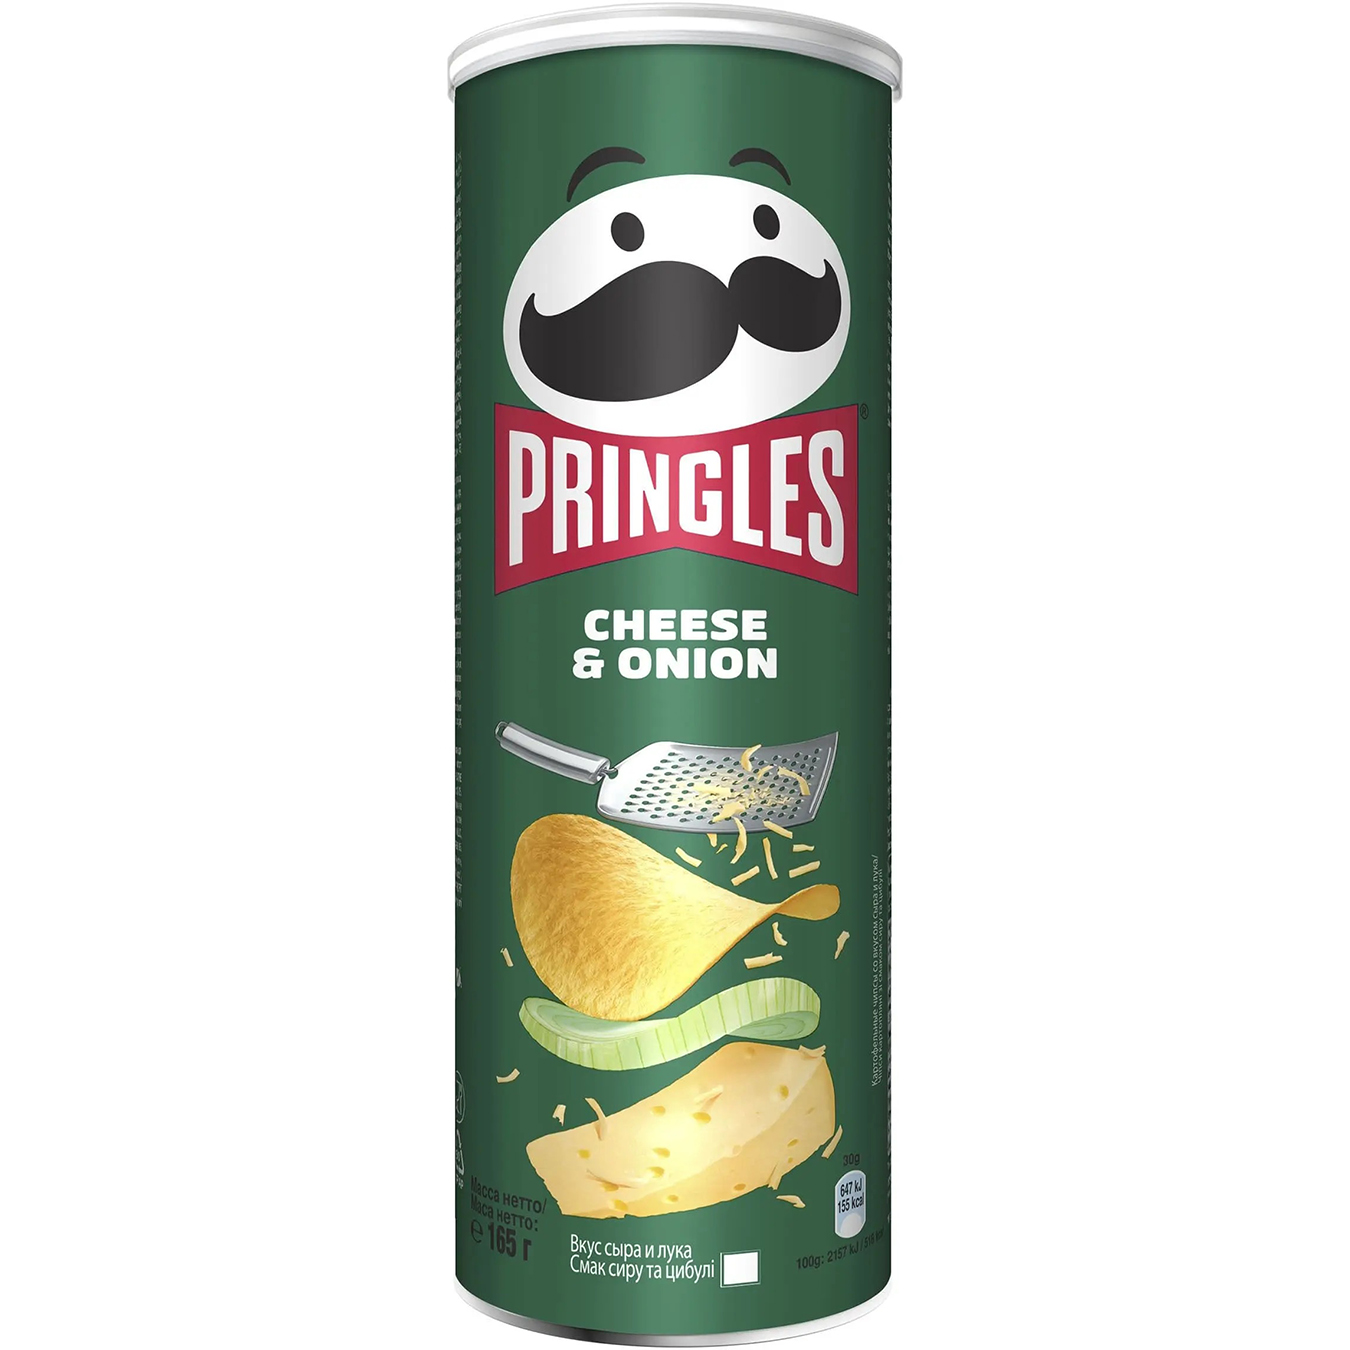 Pringles Potato chips with cheese and onion taste 165g